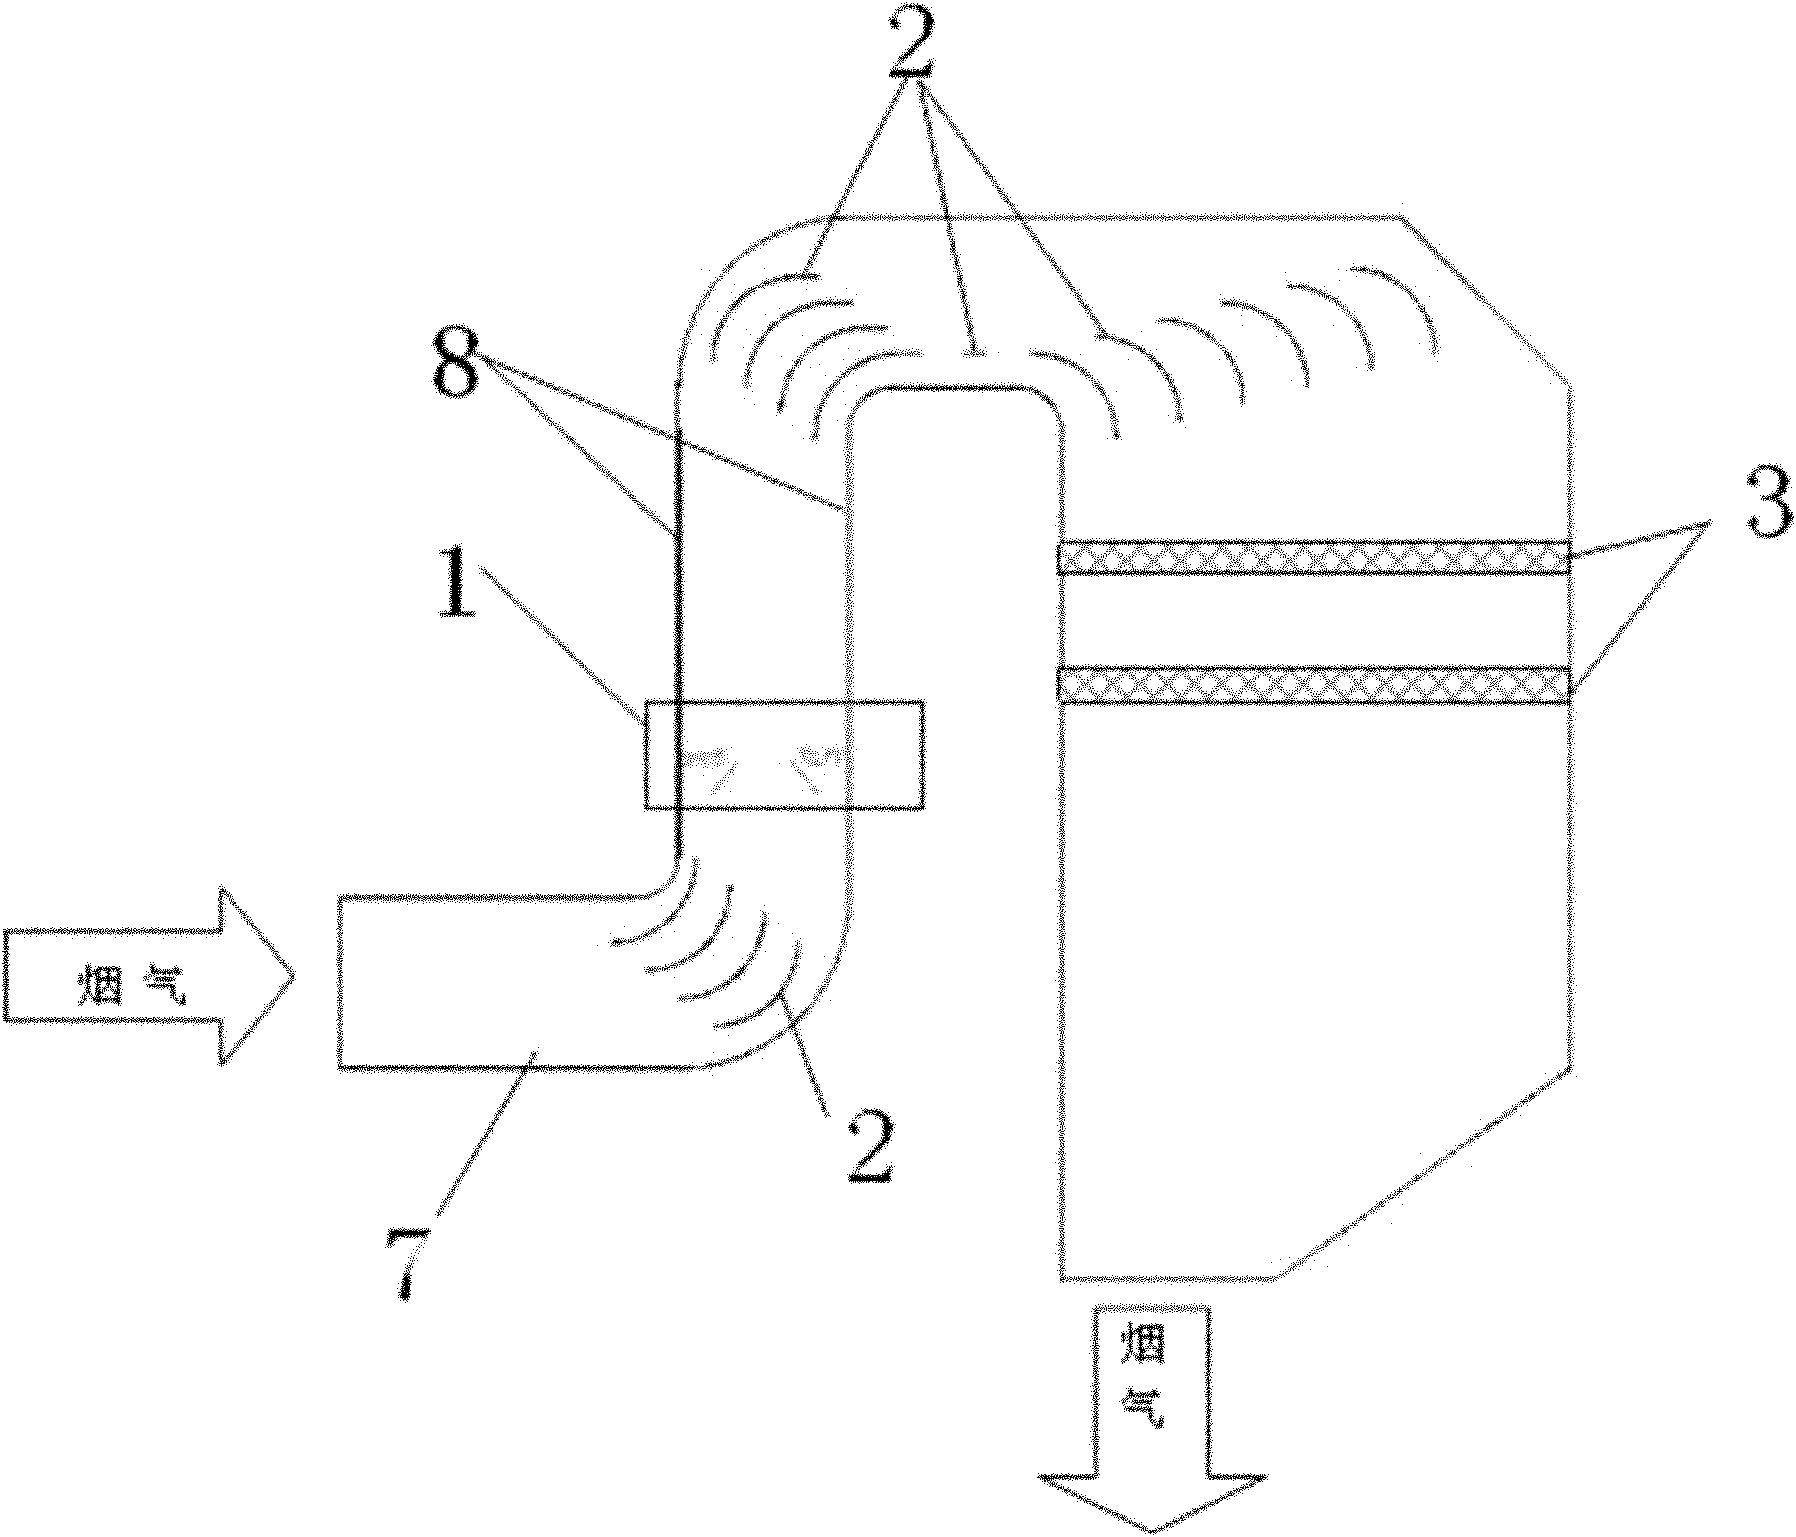 SCR (silicon controlled rectifier) denitration reactor of coal fuel gas